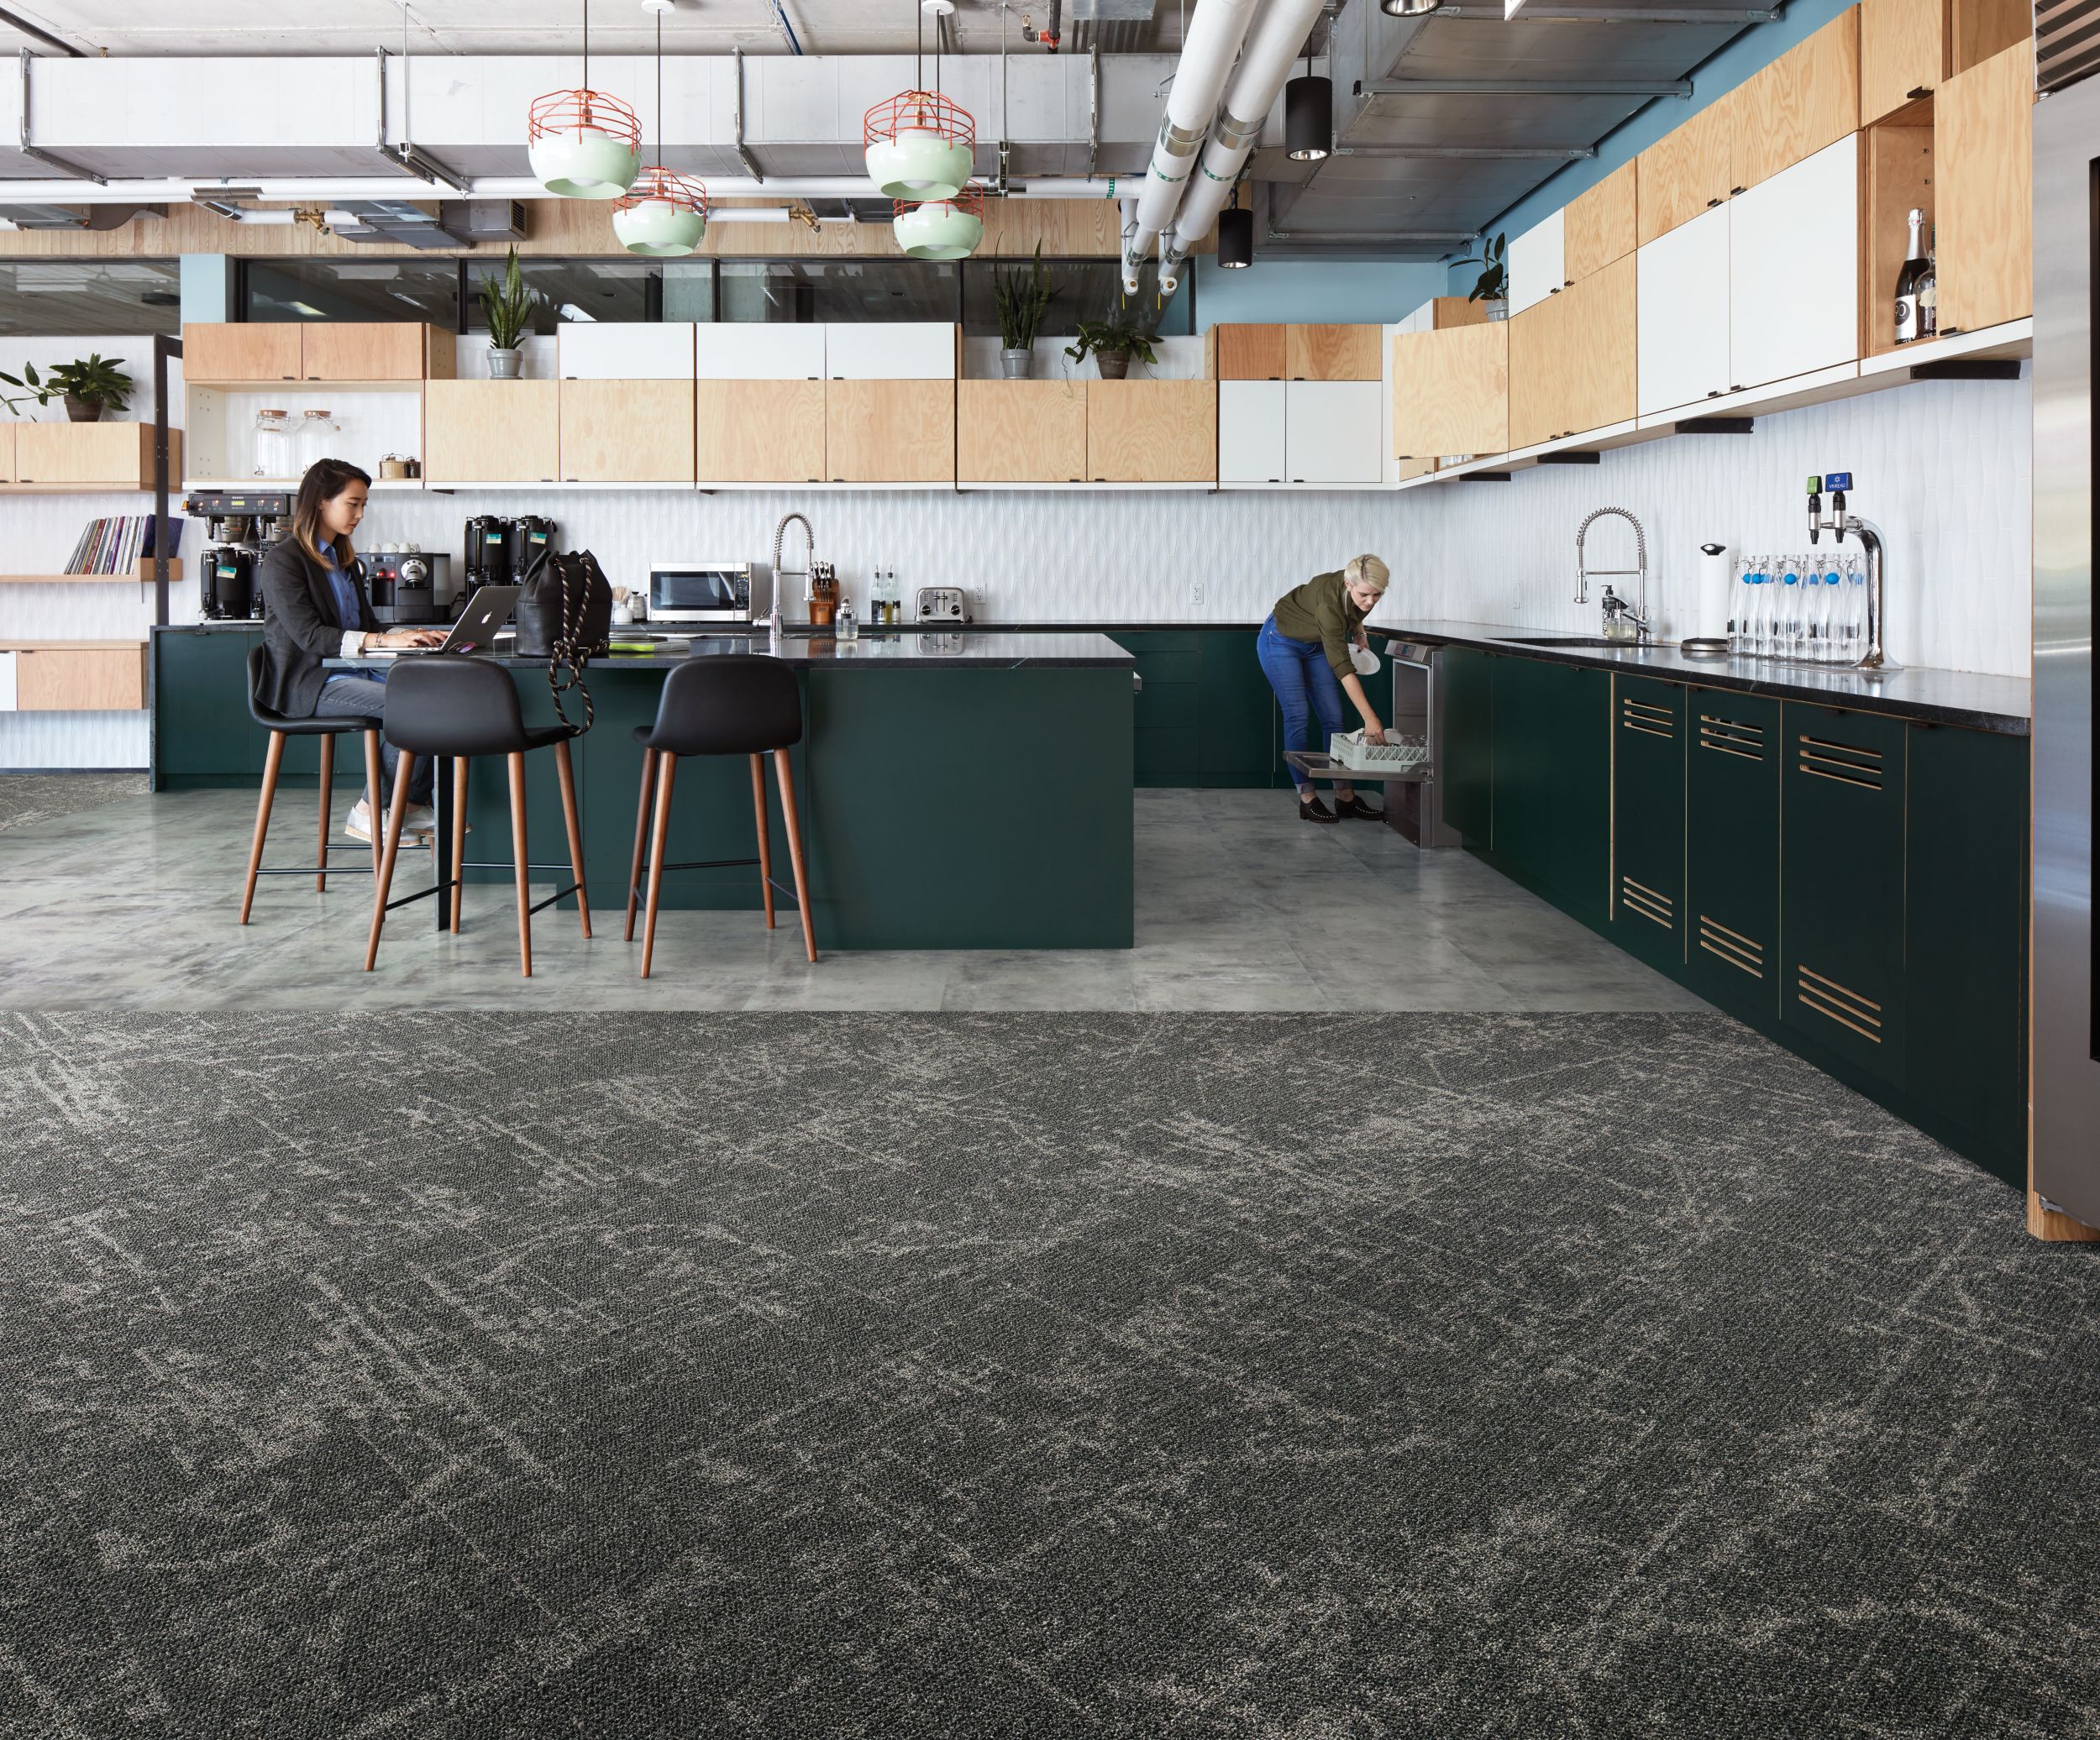 Interface Ice Breaker carpet tile and Textured Stones LVT in kitchen area with women lodaing dish washer and women working on computer Bildnummer 6